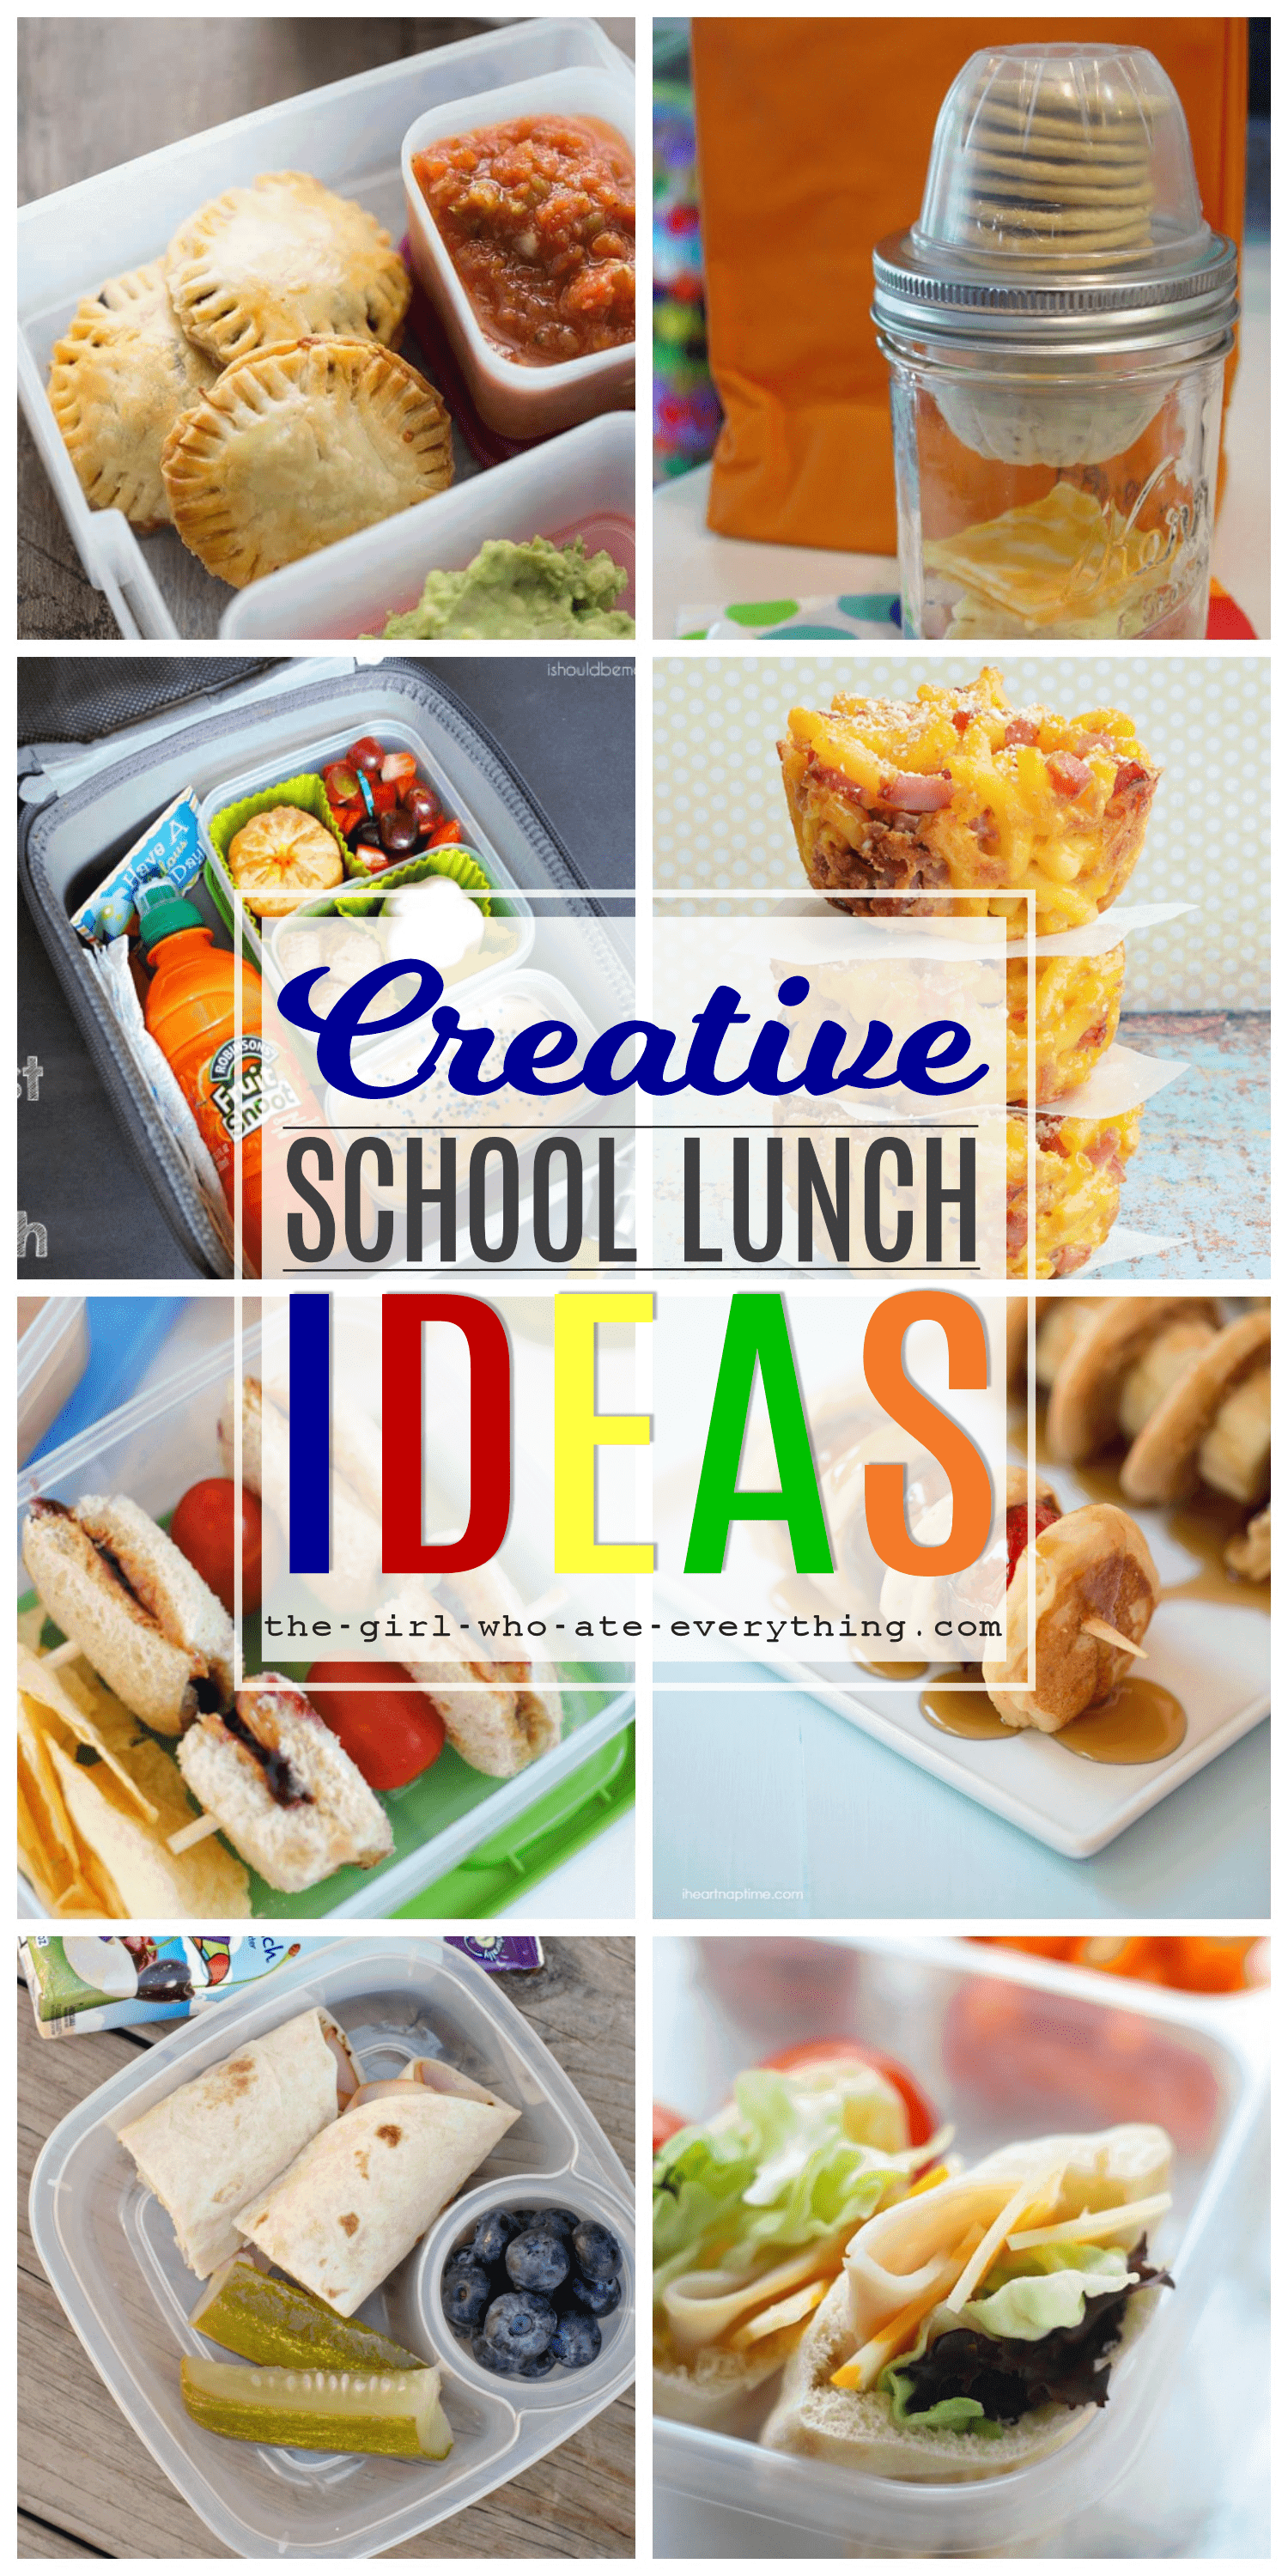 https://www.the-girl-who-ate-everything.com/wp-content/uploads/2016/07/Creative-School-Lunch-Ideas.png